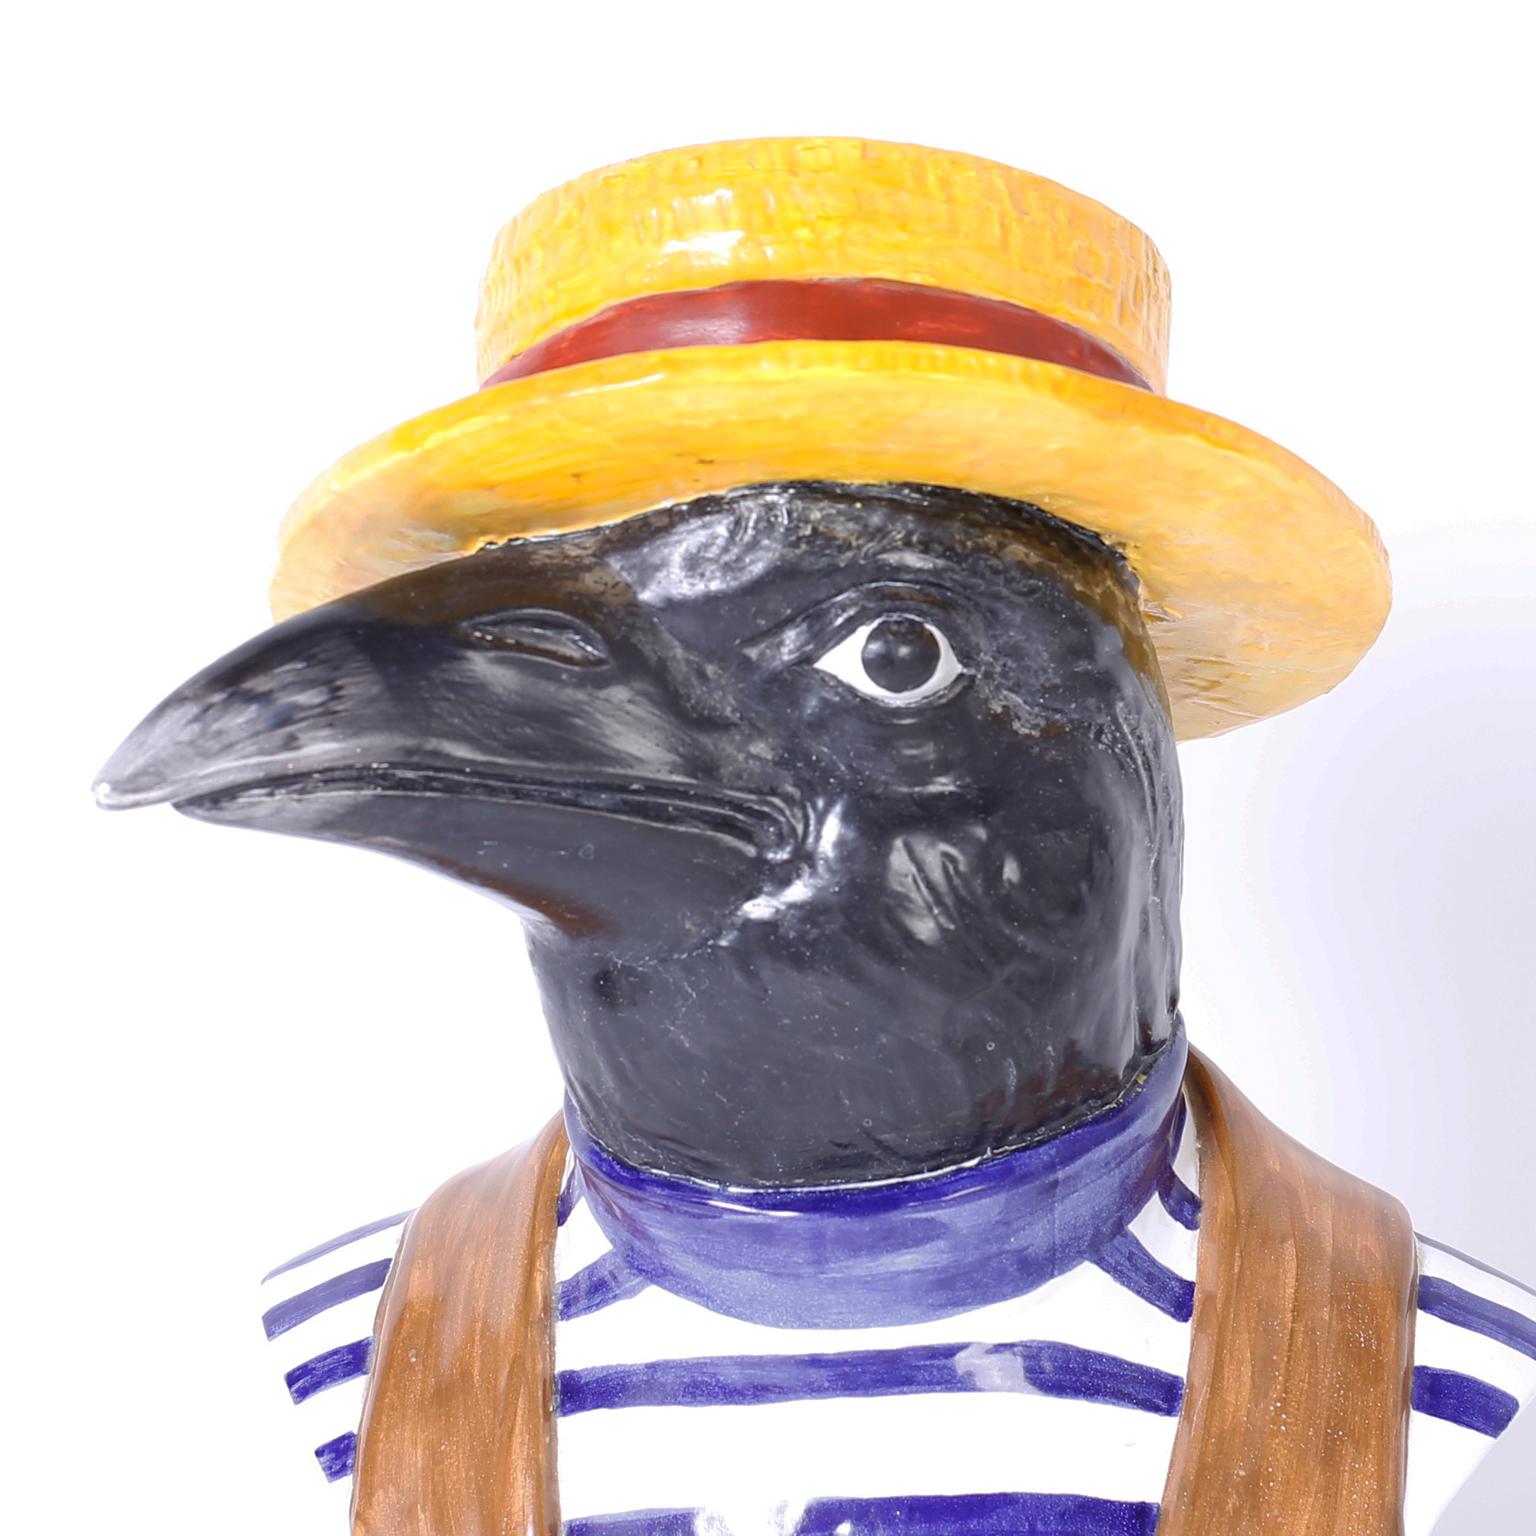 Whimsical Italian porcelain bust of a Crow or bird decked out in the Classic Venetian boatman's striped shirt and straw hat. Signed on the bottom Italy Royal Majolyca.
 